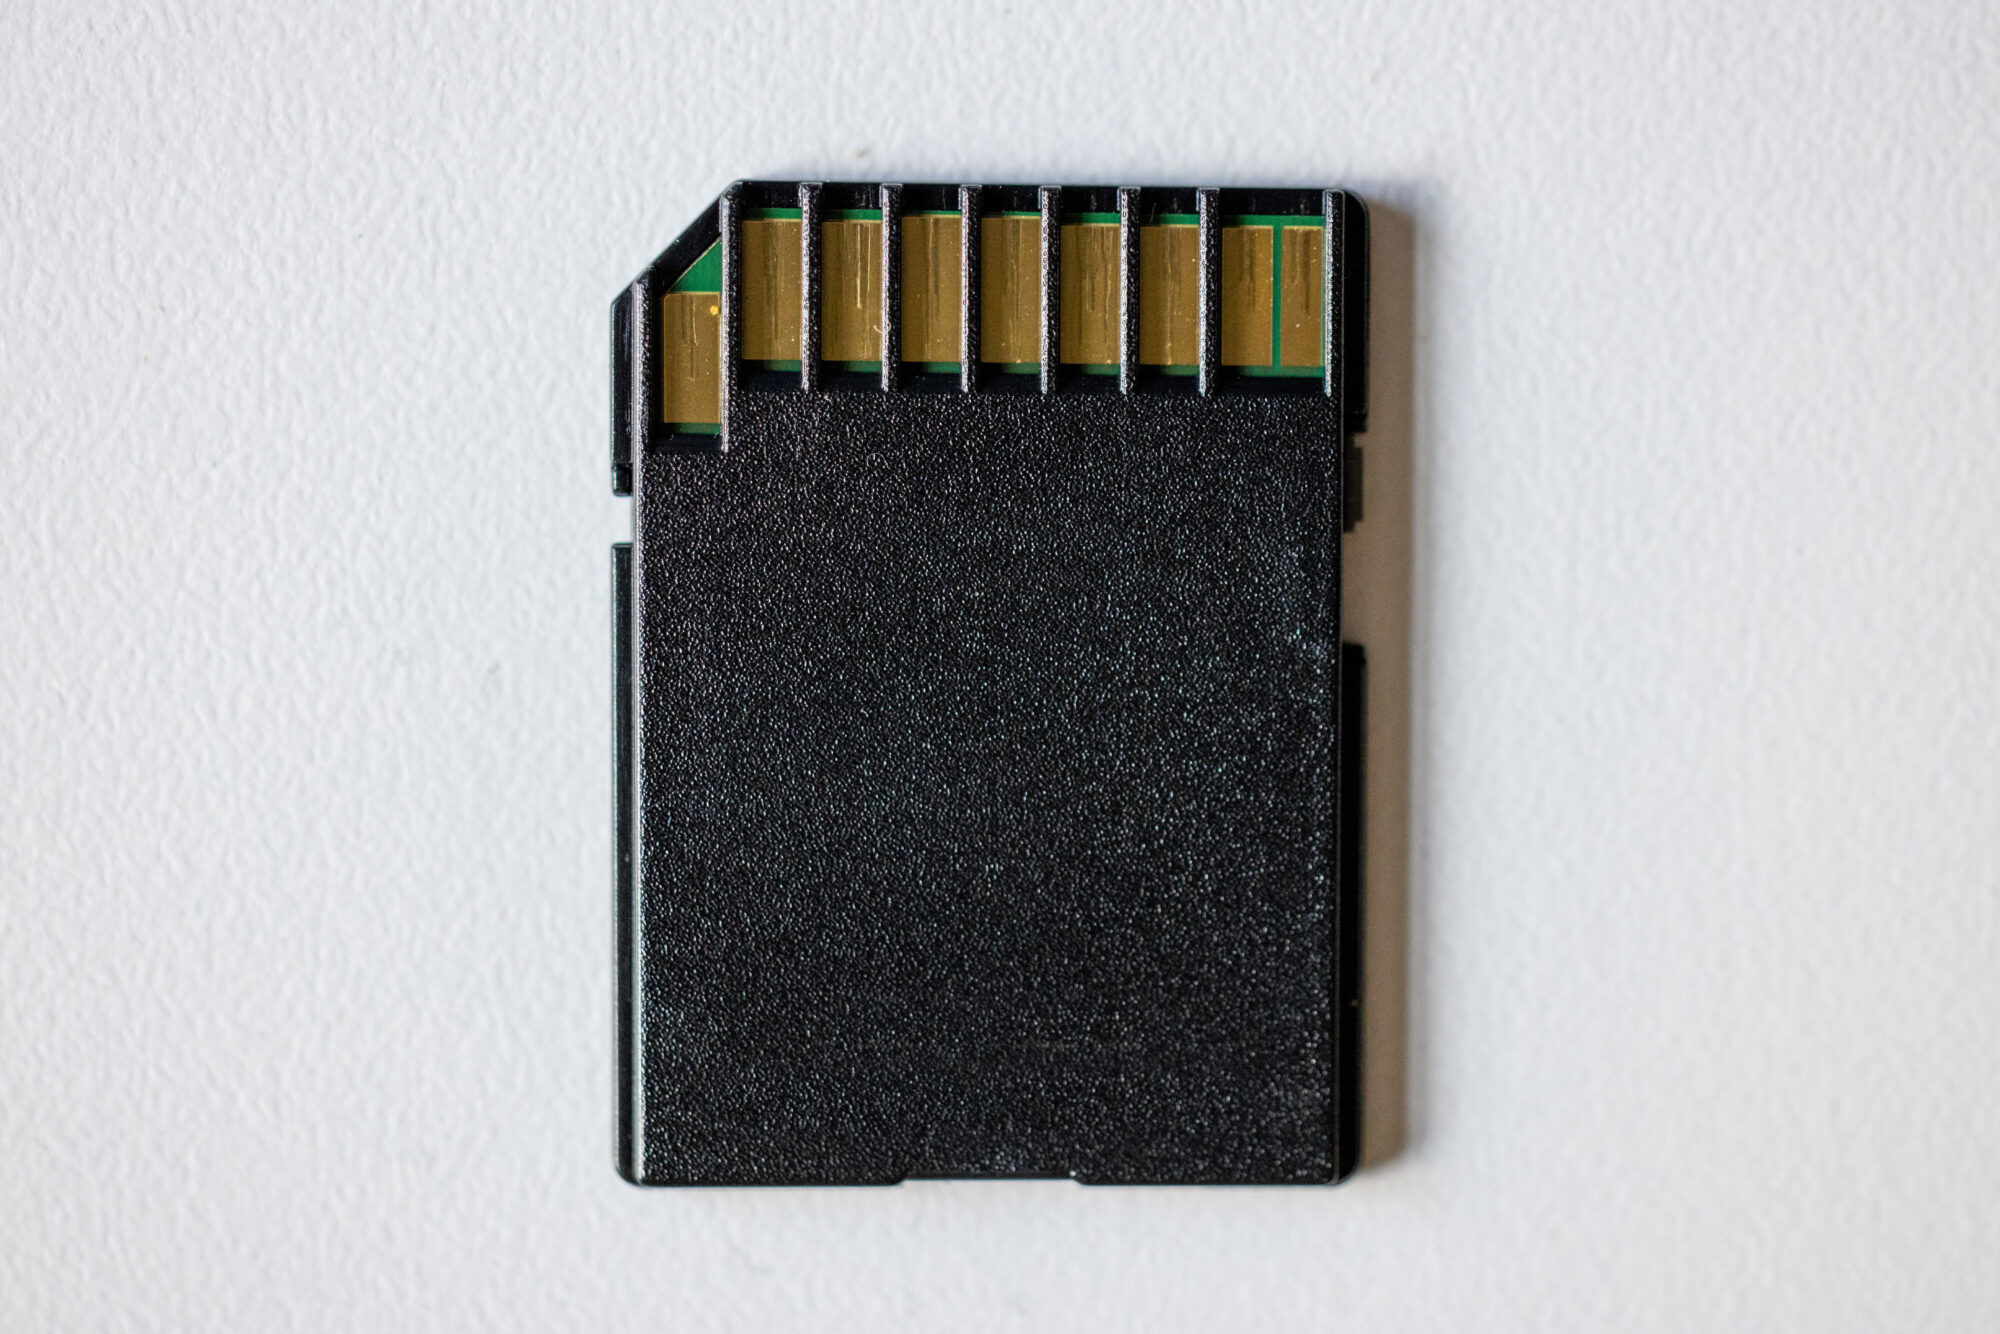 Camera Memory Card Free Stock Picture